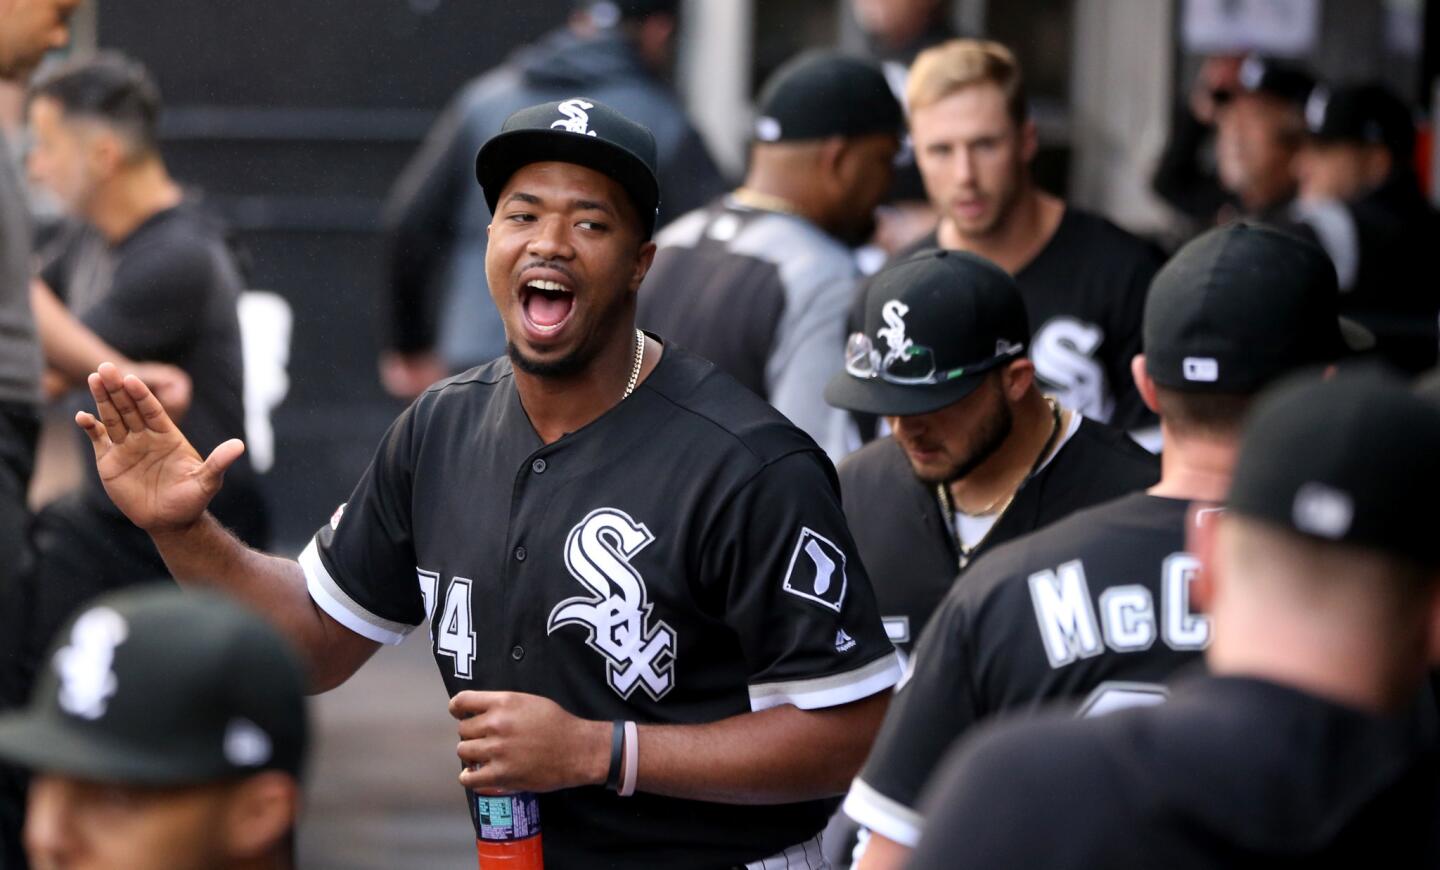 White Sox left fielder Eloy Jimenez has some fun in the dugout before the start of a game against the Yankees at Guaranteed Rate Field on Saturday, June 15, 2019.